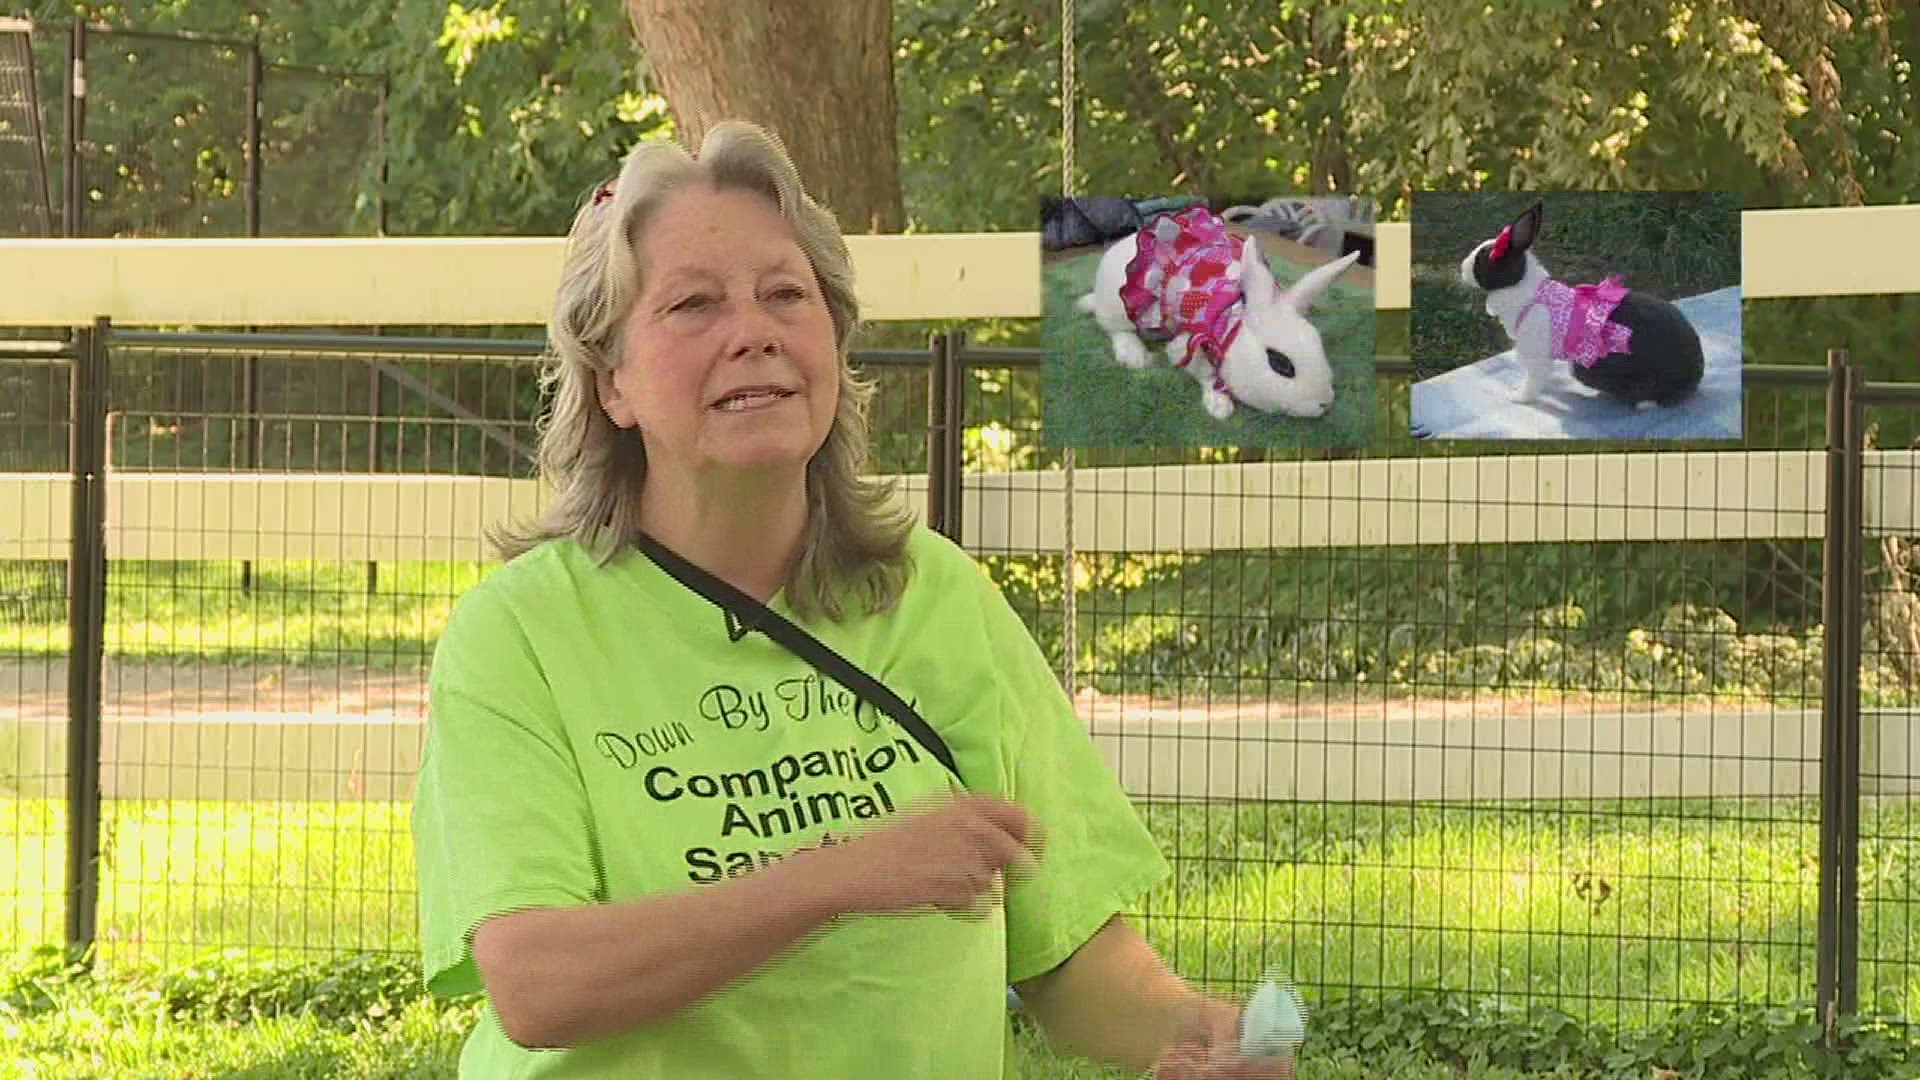 She is "Multiplying Good" by countering cruelty with kindness... through animals.